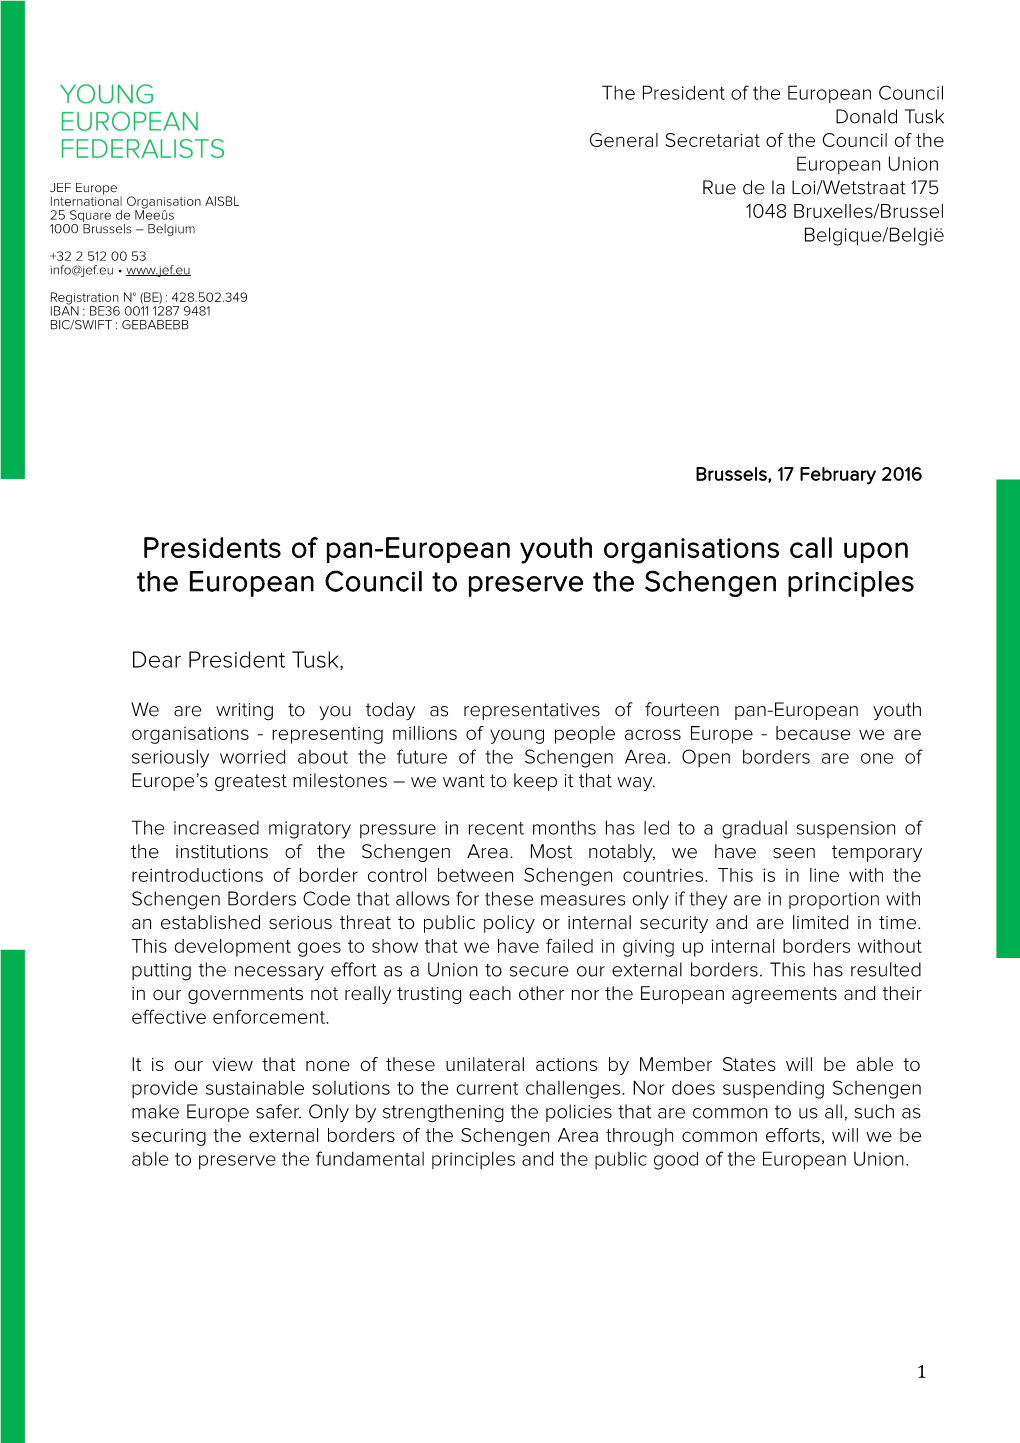 Presidents of Pan-European Youth Organisations Call Upon the European Council to Preserve the Schengen Principles